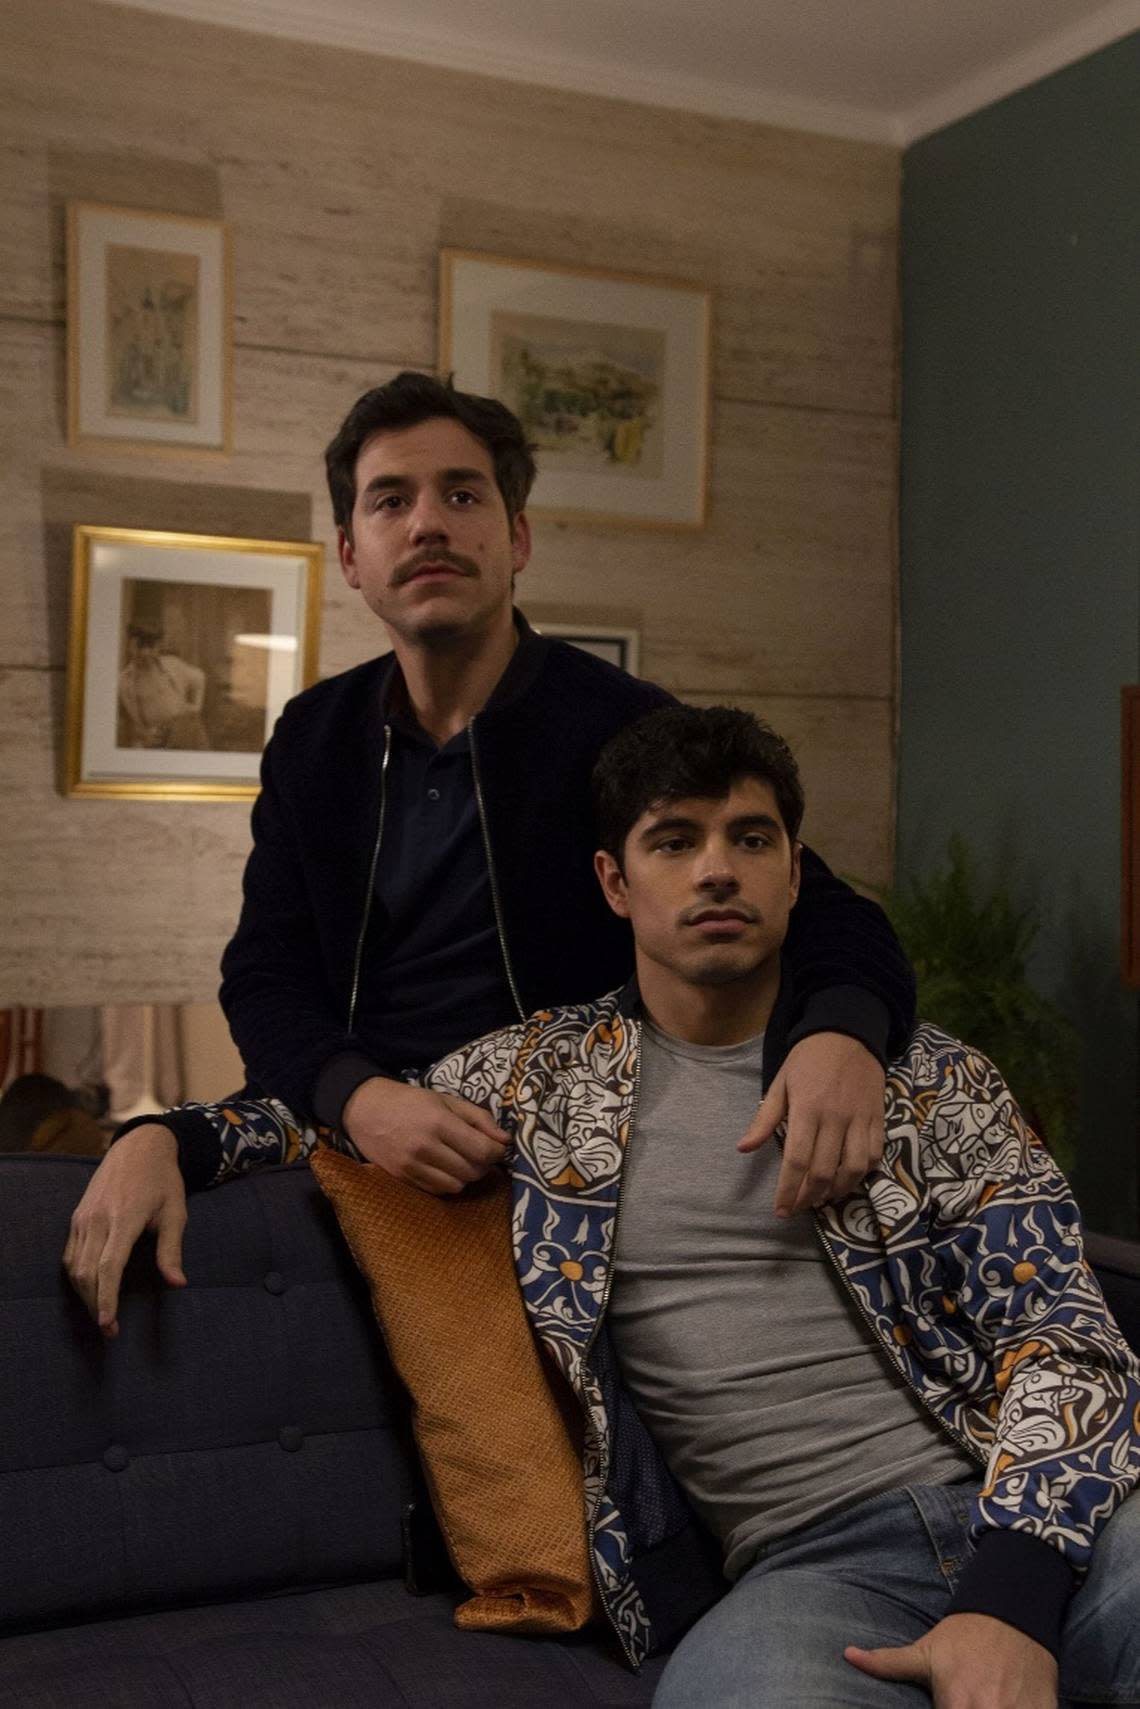 Tensions run high in “Blue Lights,” an LGBTQ drama from Argentina. The film is screening at OUTshine LGBTQ+ Film Festival on April 20.